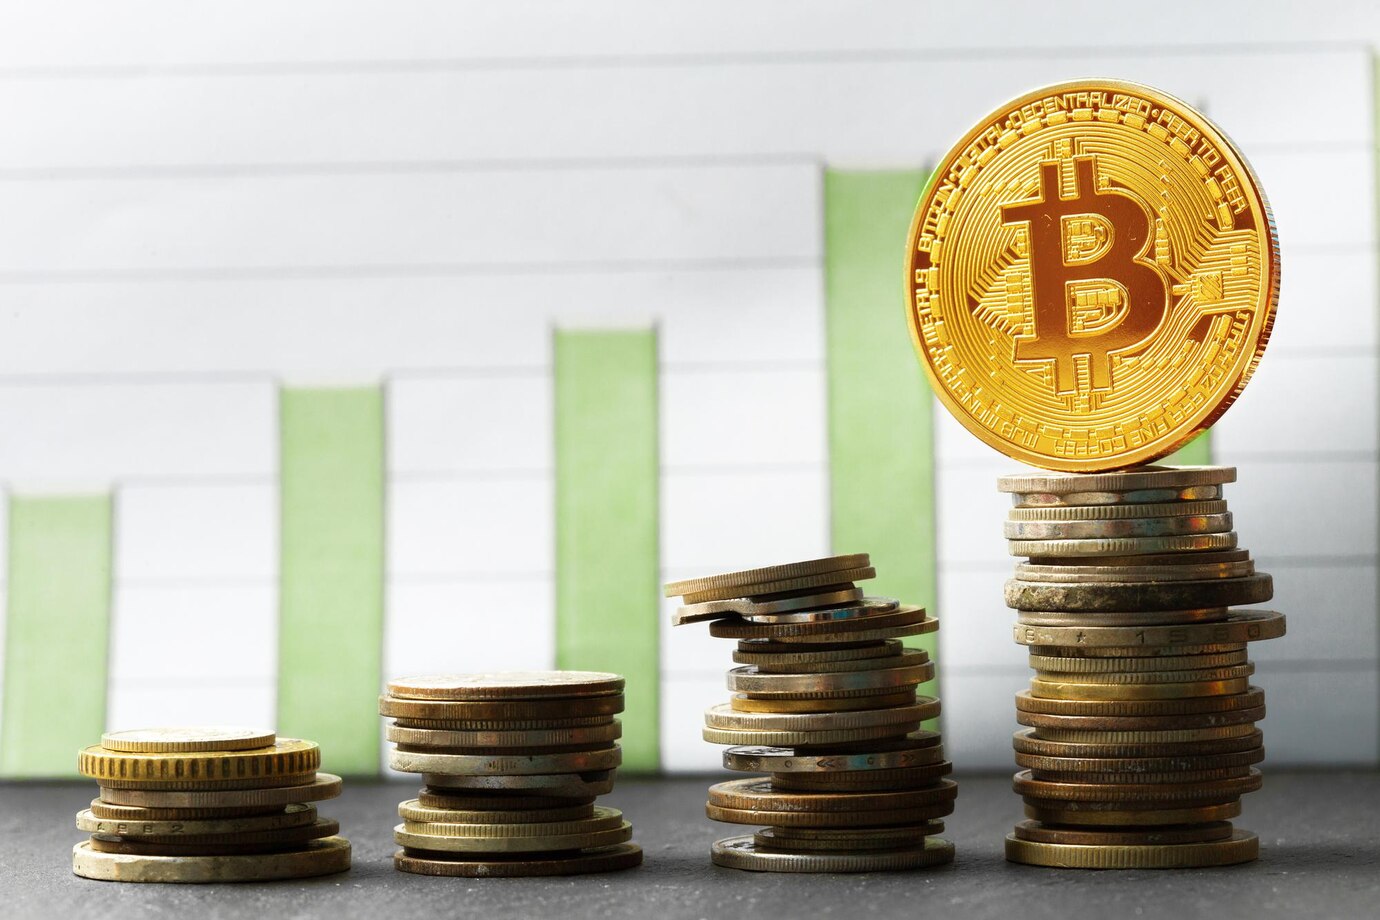 Bitcoin ETFs on the Rise with $10 Billion Milestone and Growing Institutional Interest